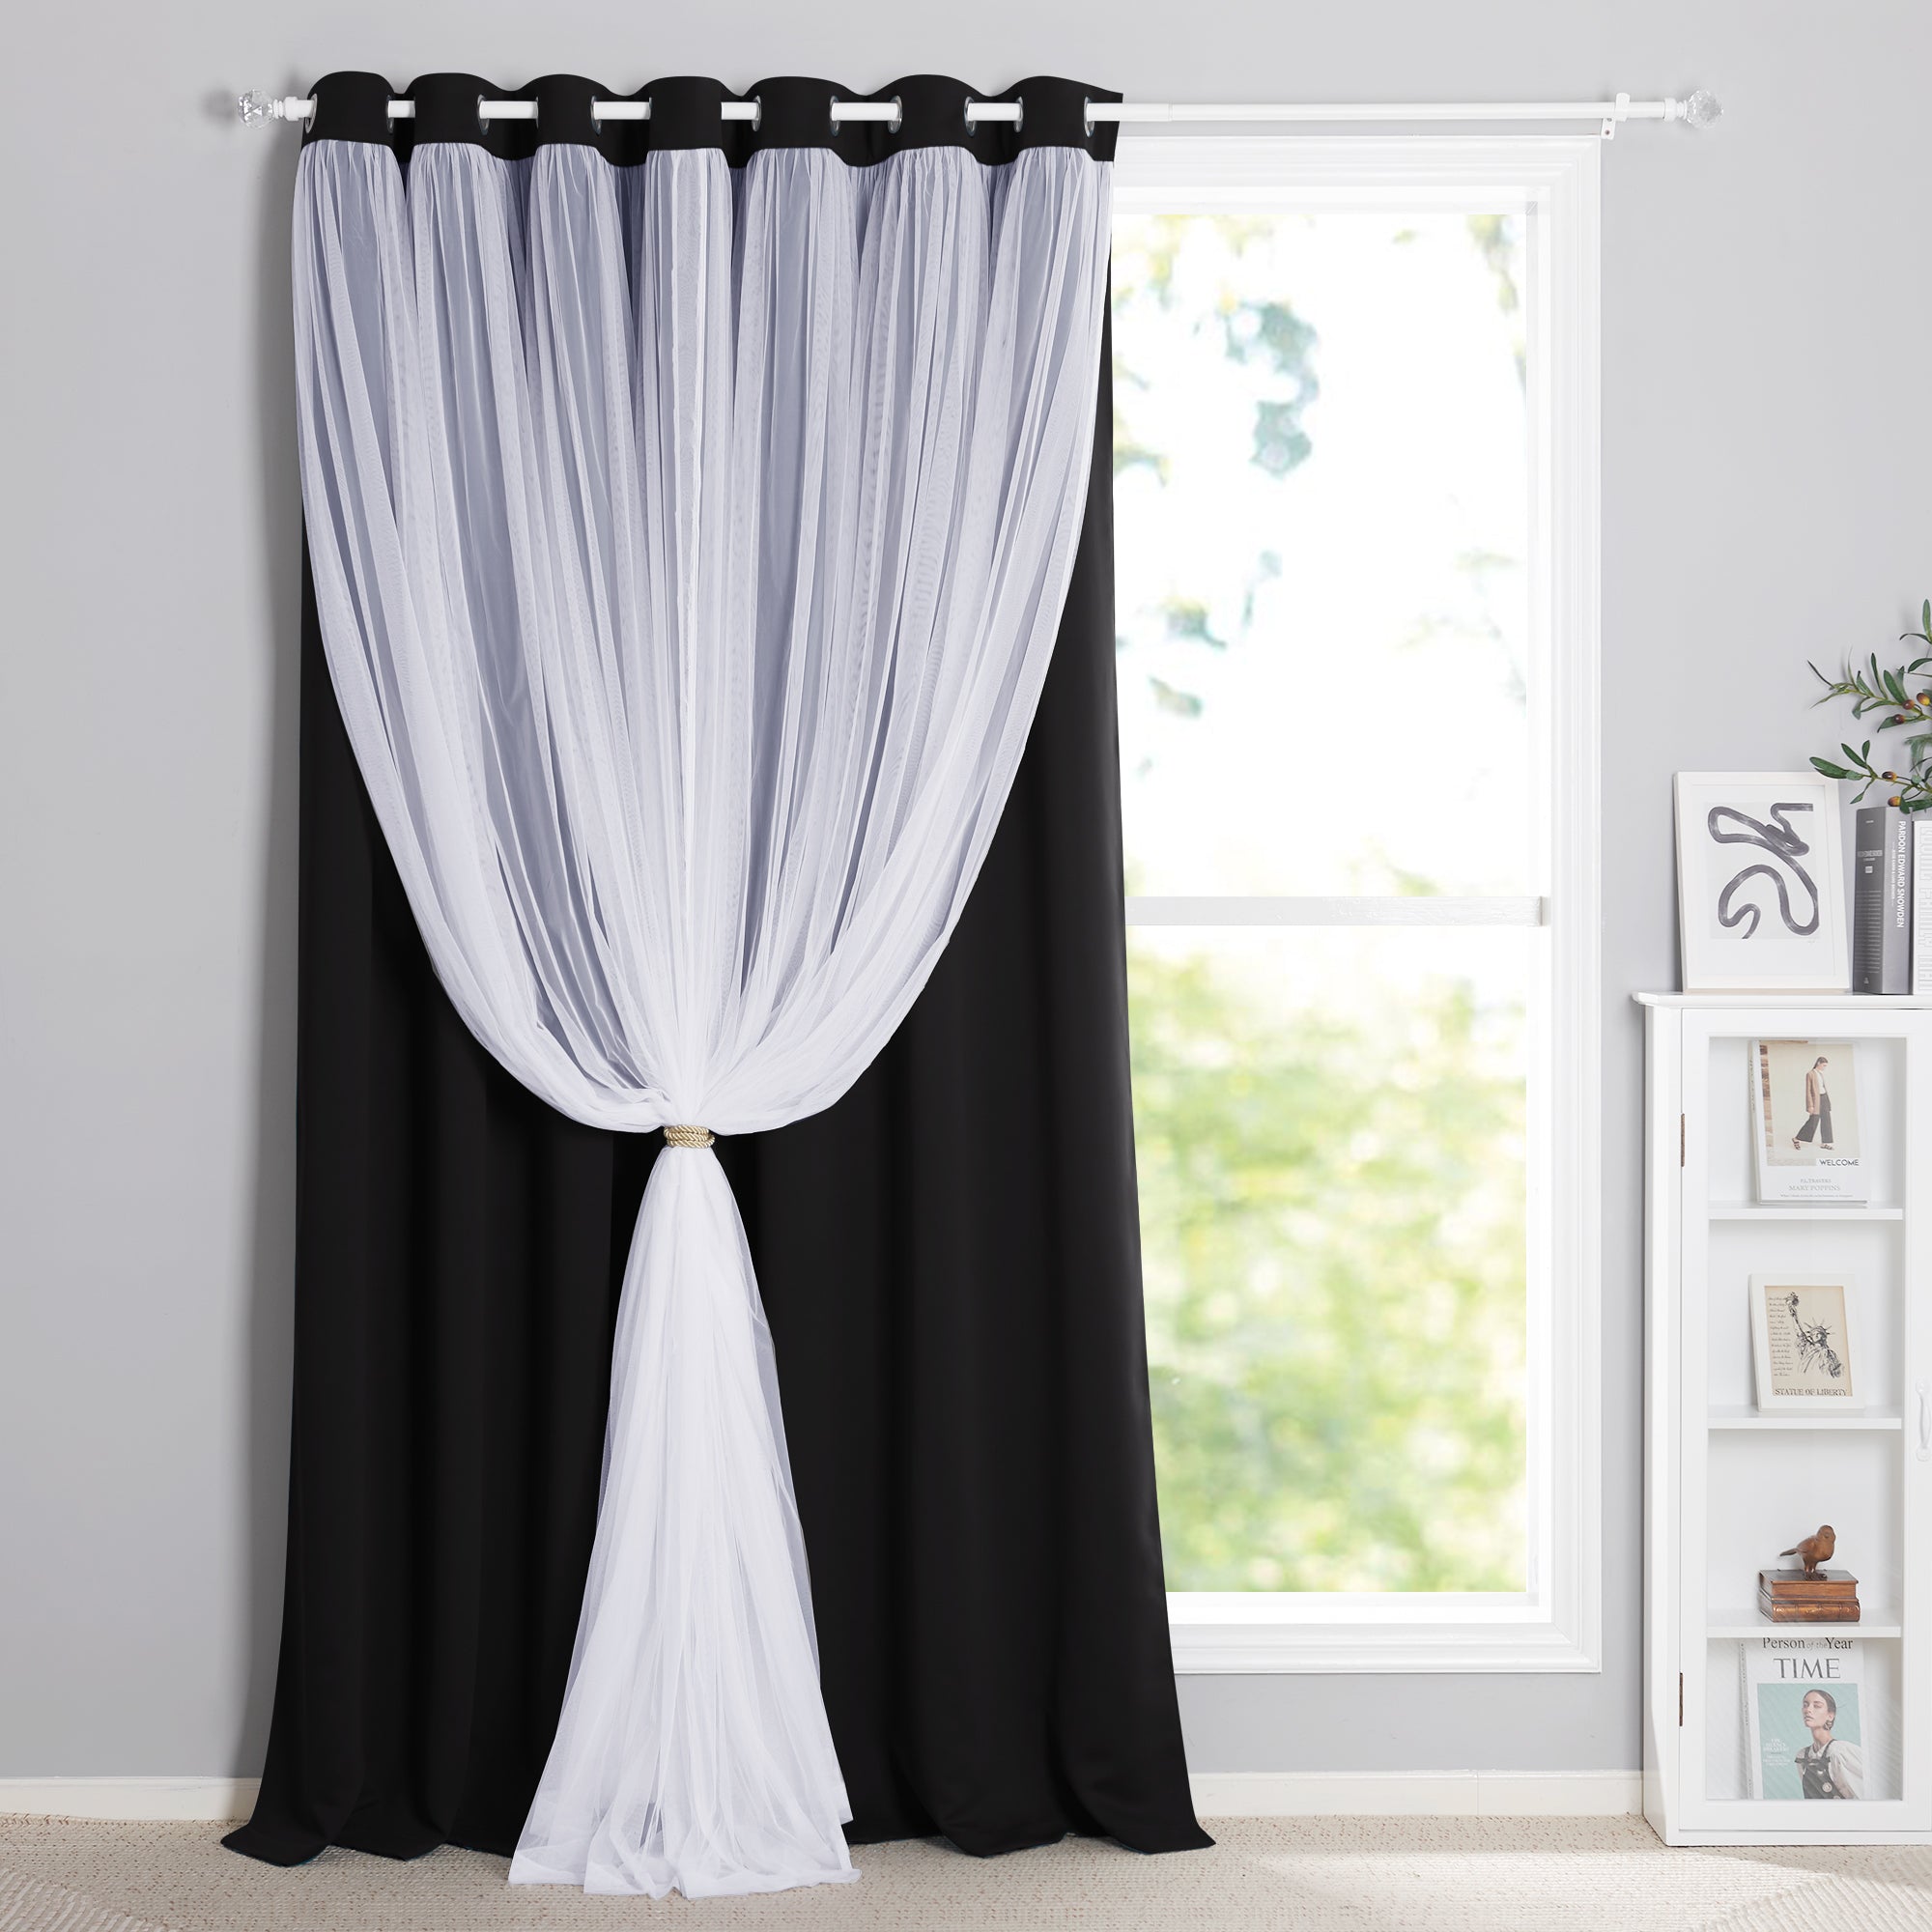 Blackout Woven Curtain With Crushed Voile Sheer Curtain Overlay 1 Panel KGORGE Store